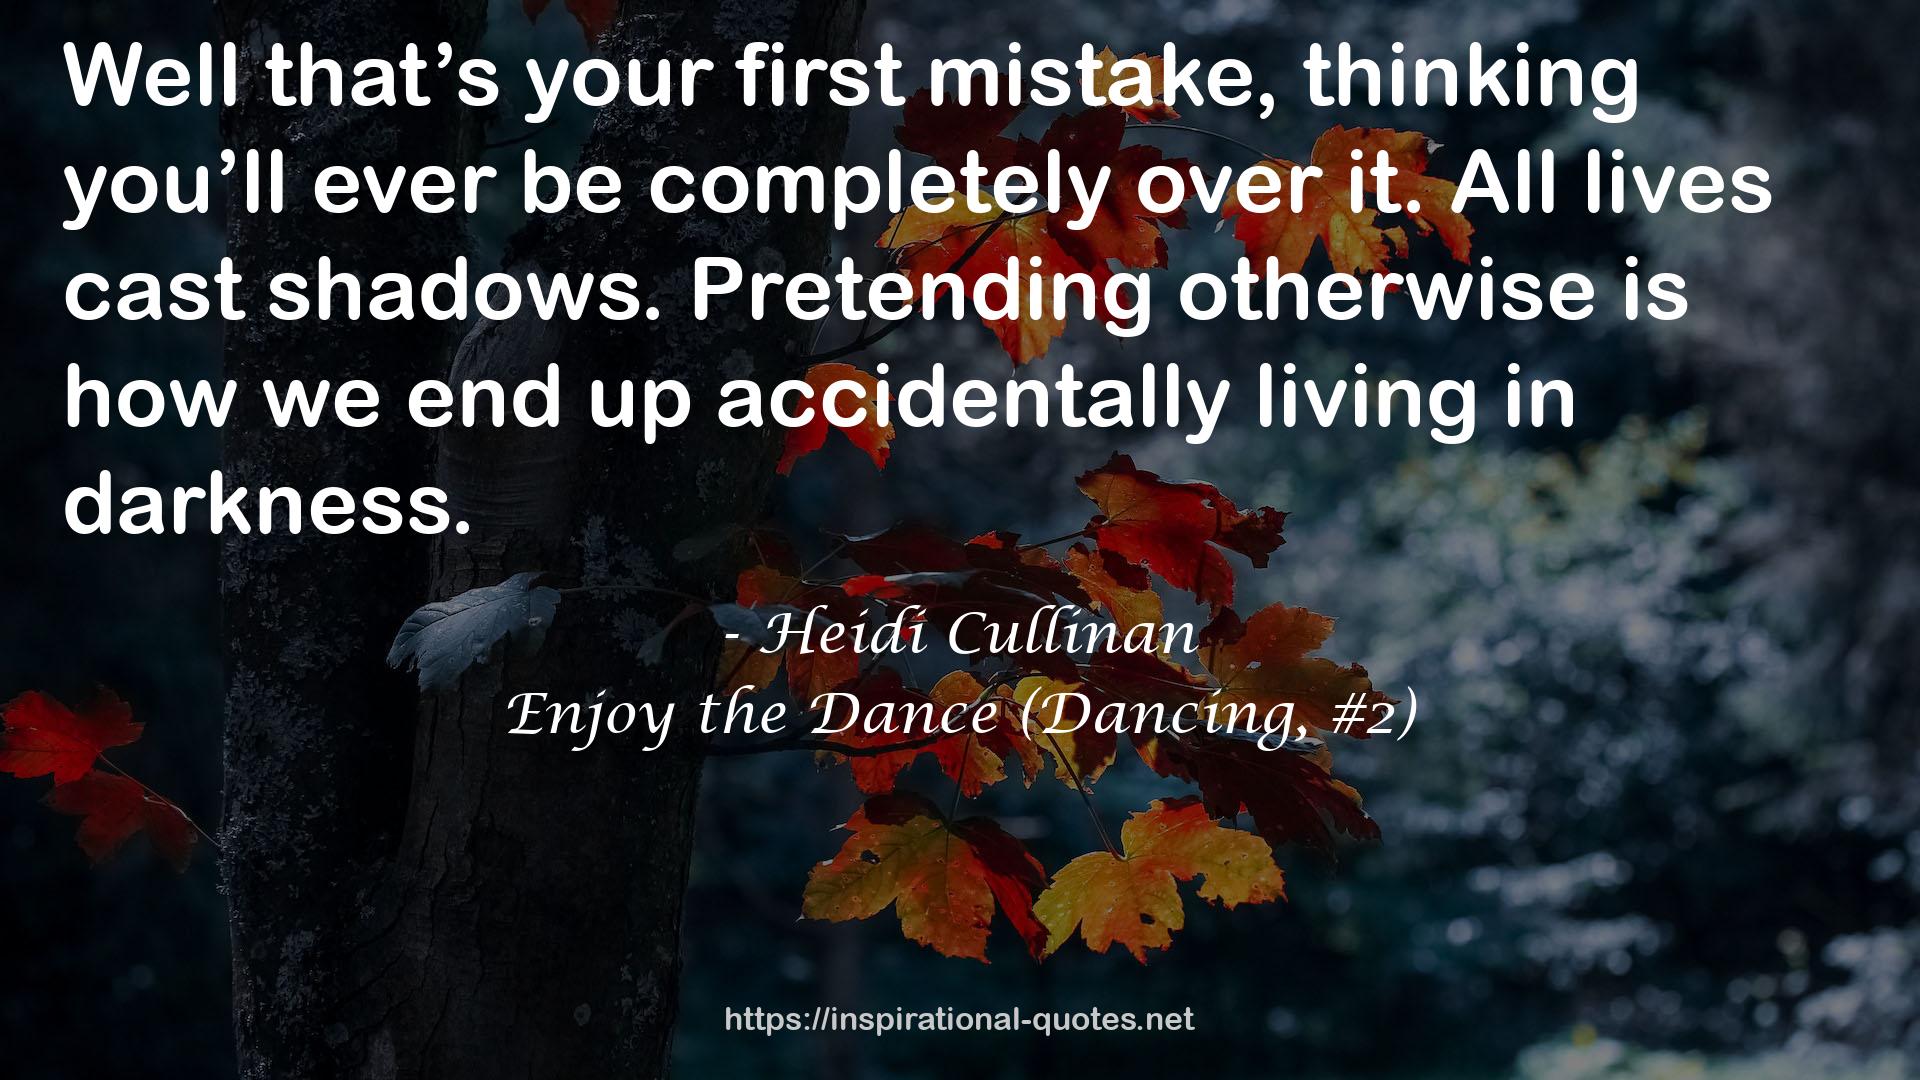 Enjoy the Dance (Dancing, #2) QUOTES